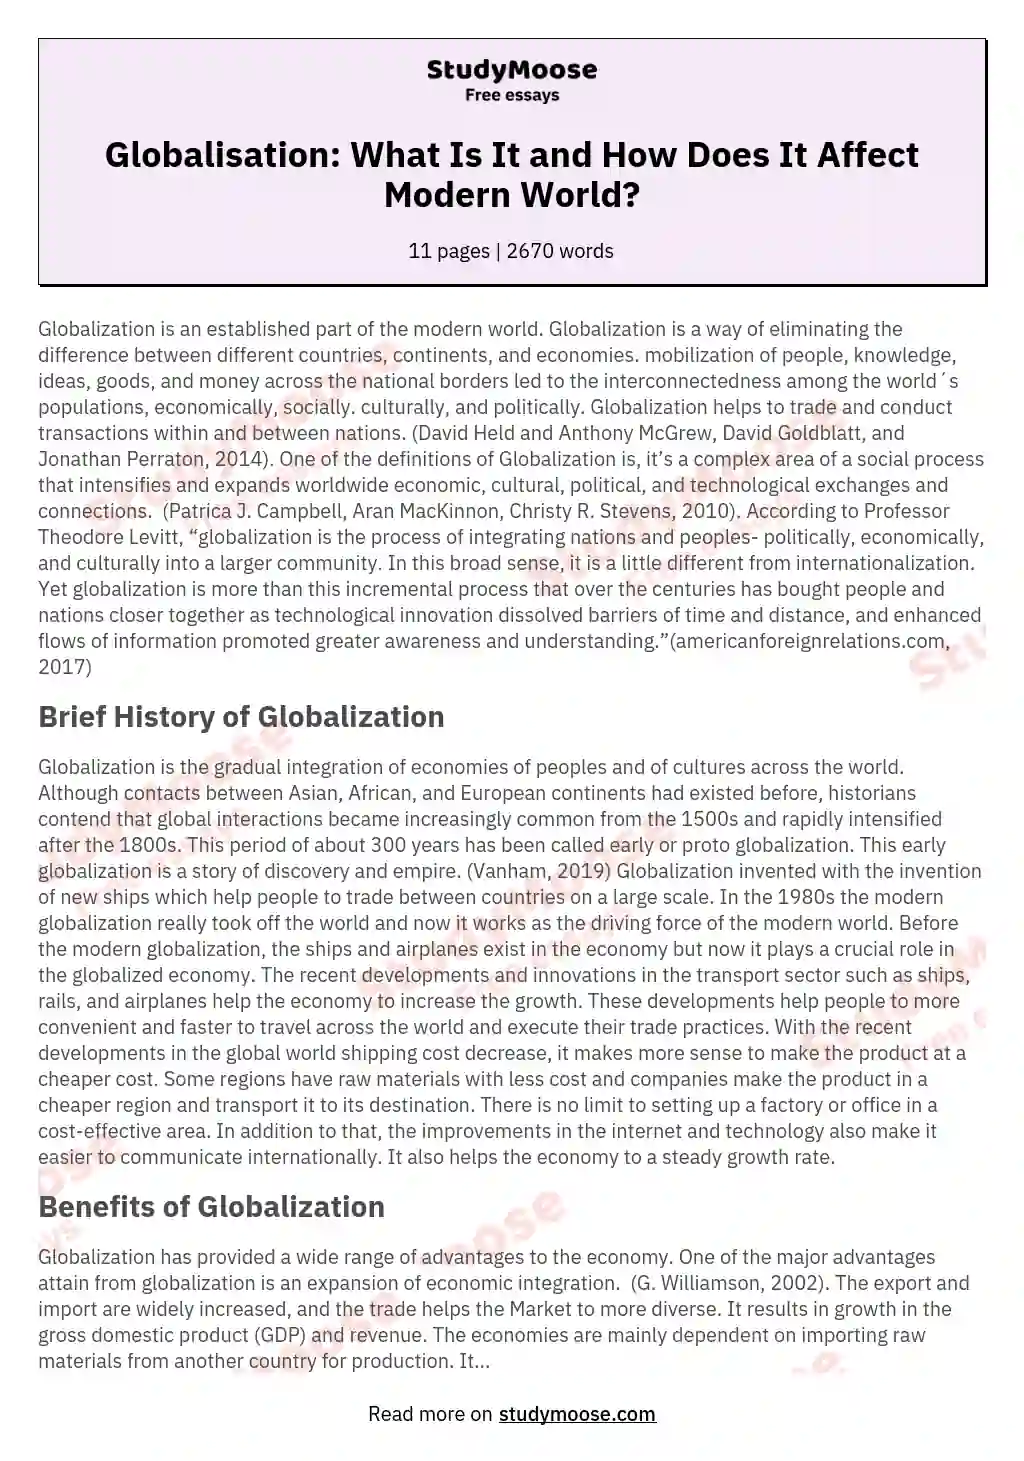 Globalisation: What Is It and How Does It Affect Modern World? essay